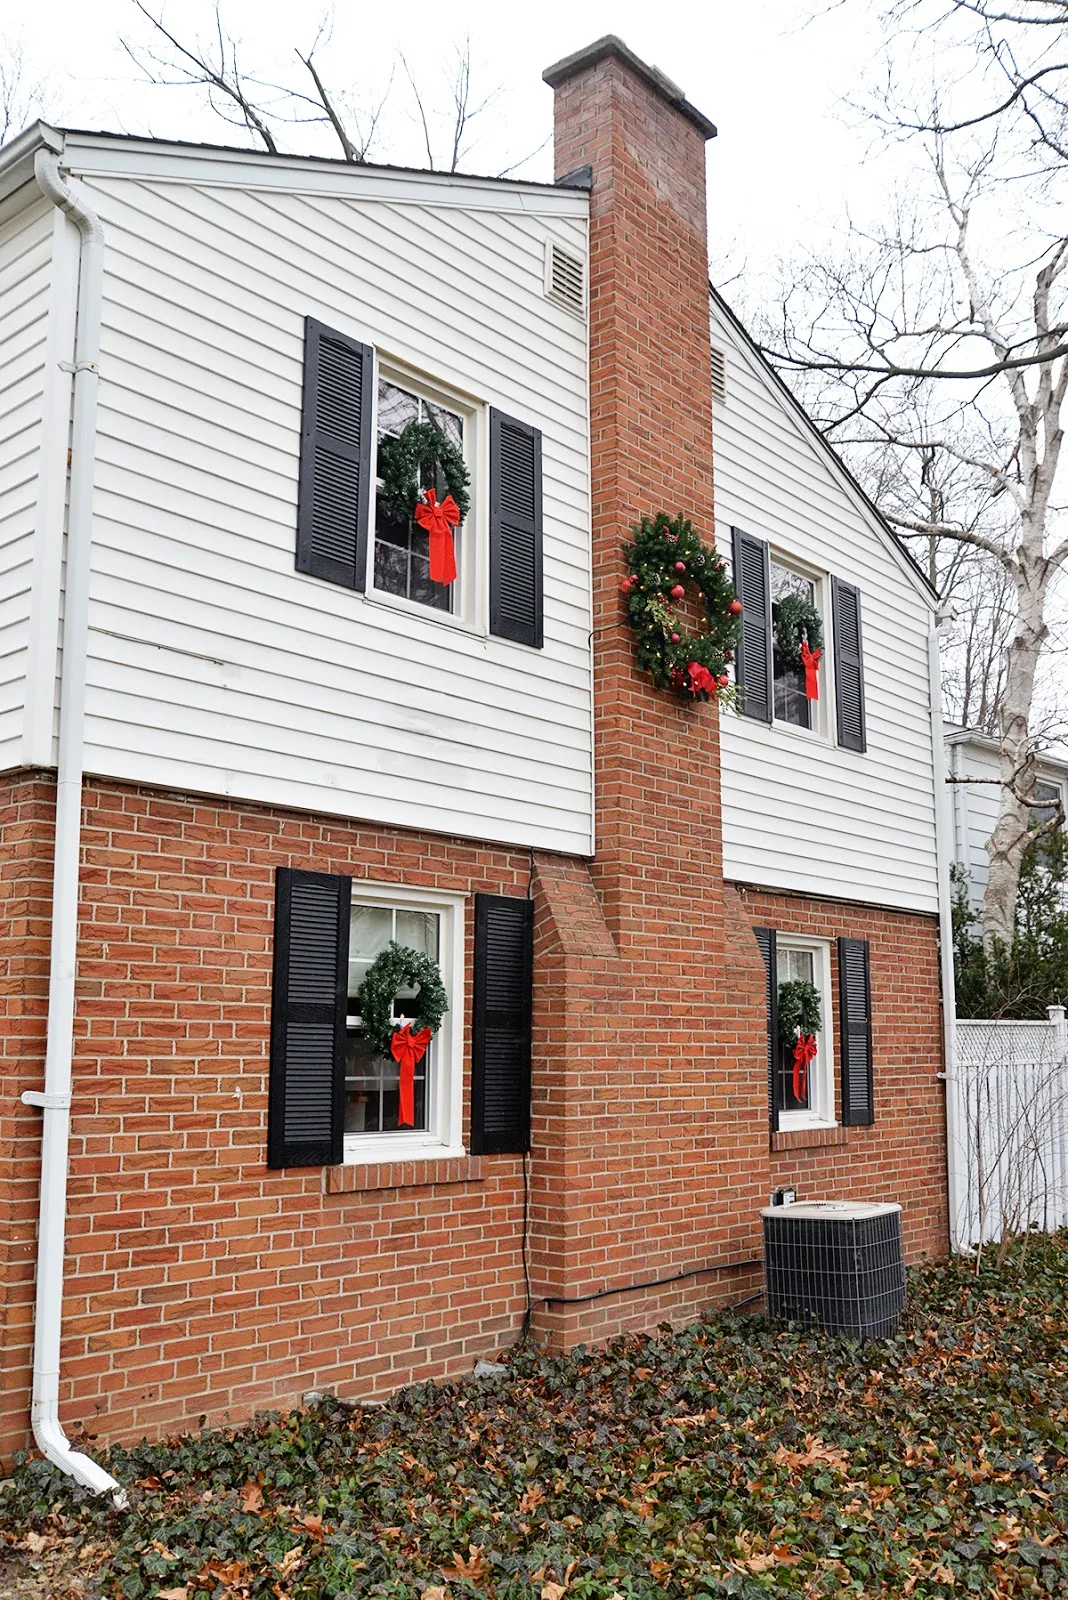 Christmas colonial house with wreaths with candles in windows. Large wreath on chimney.